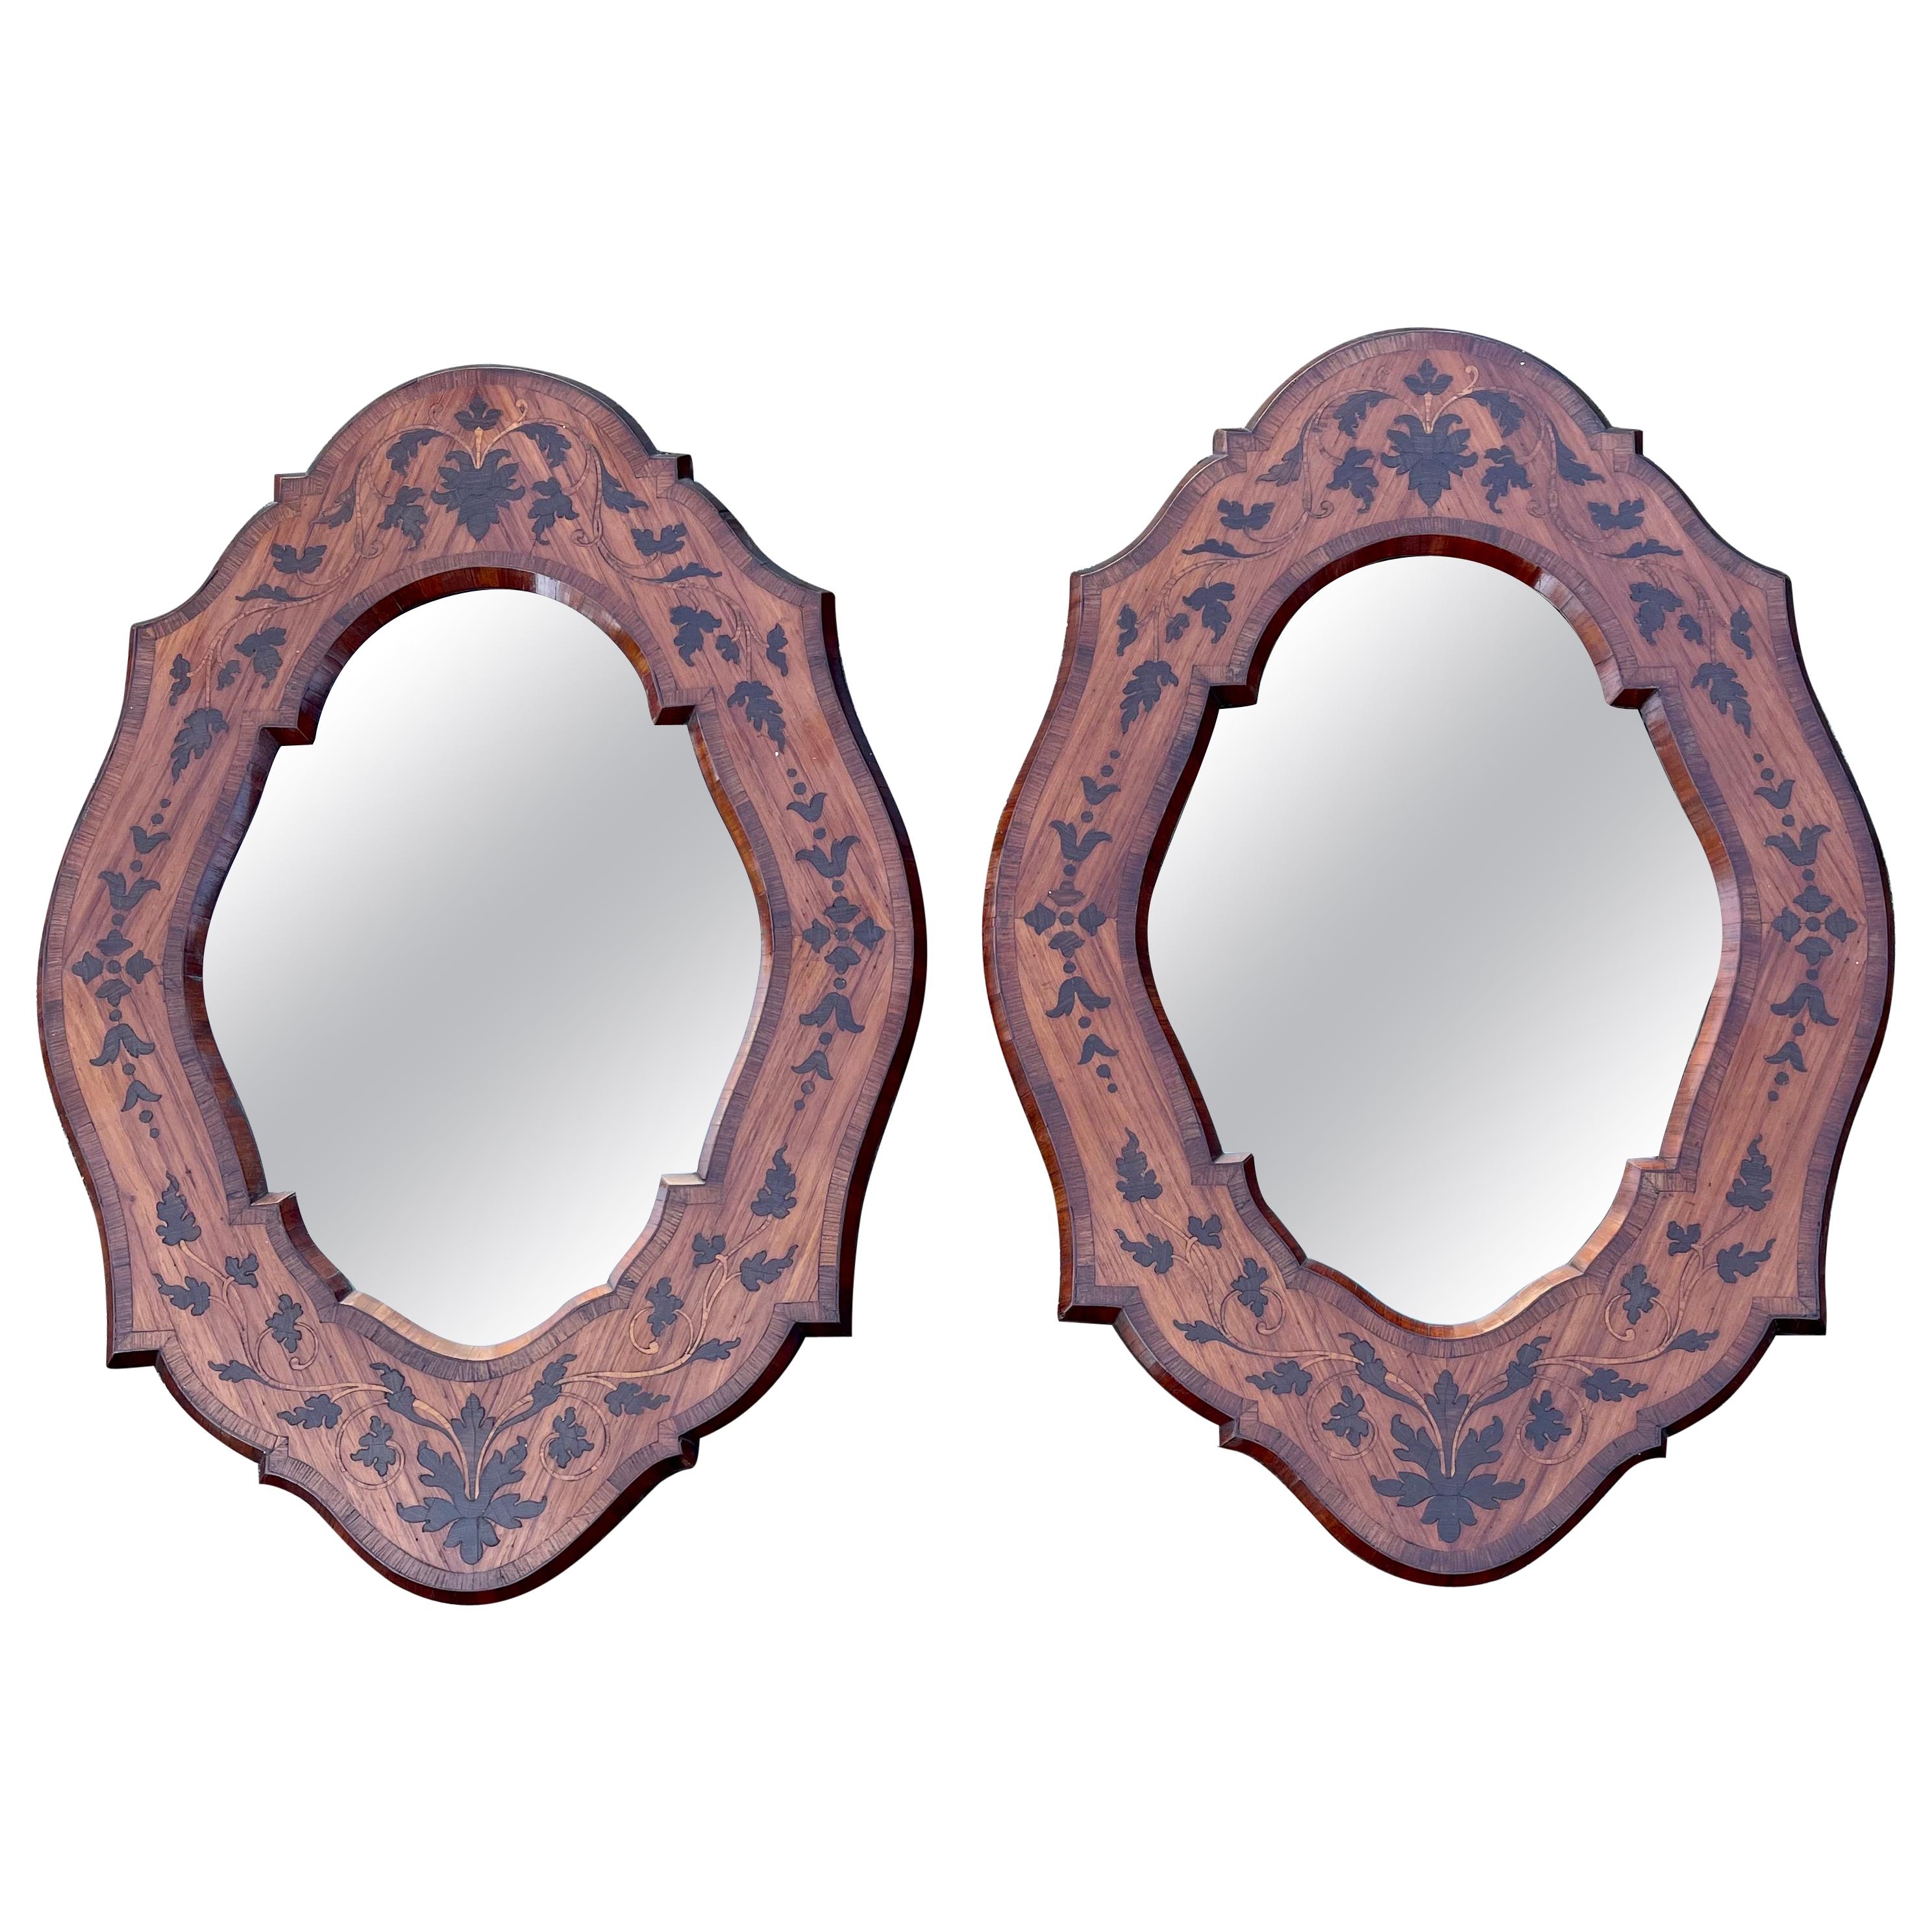 Unique Pair of Italian Wall Mirrors Kingwood Marquetry Inlay Frames, circa 1870 For Sale